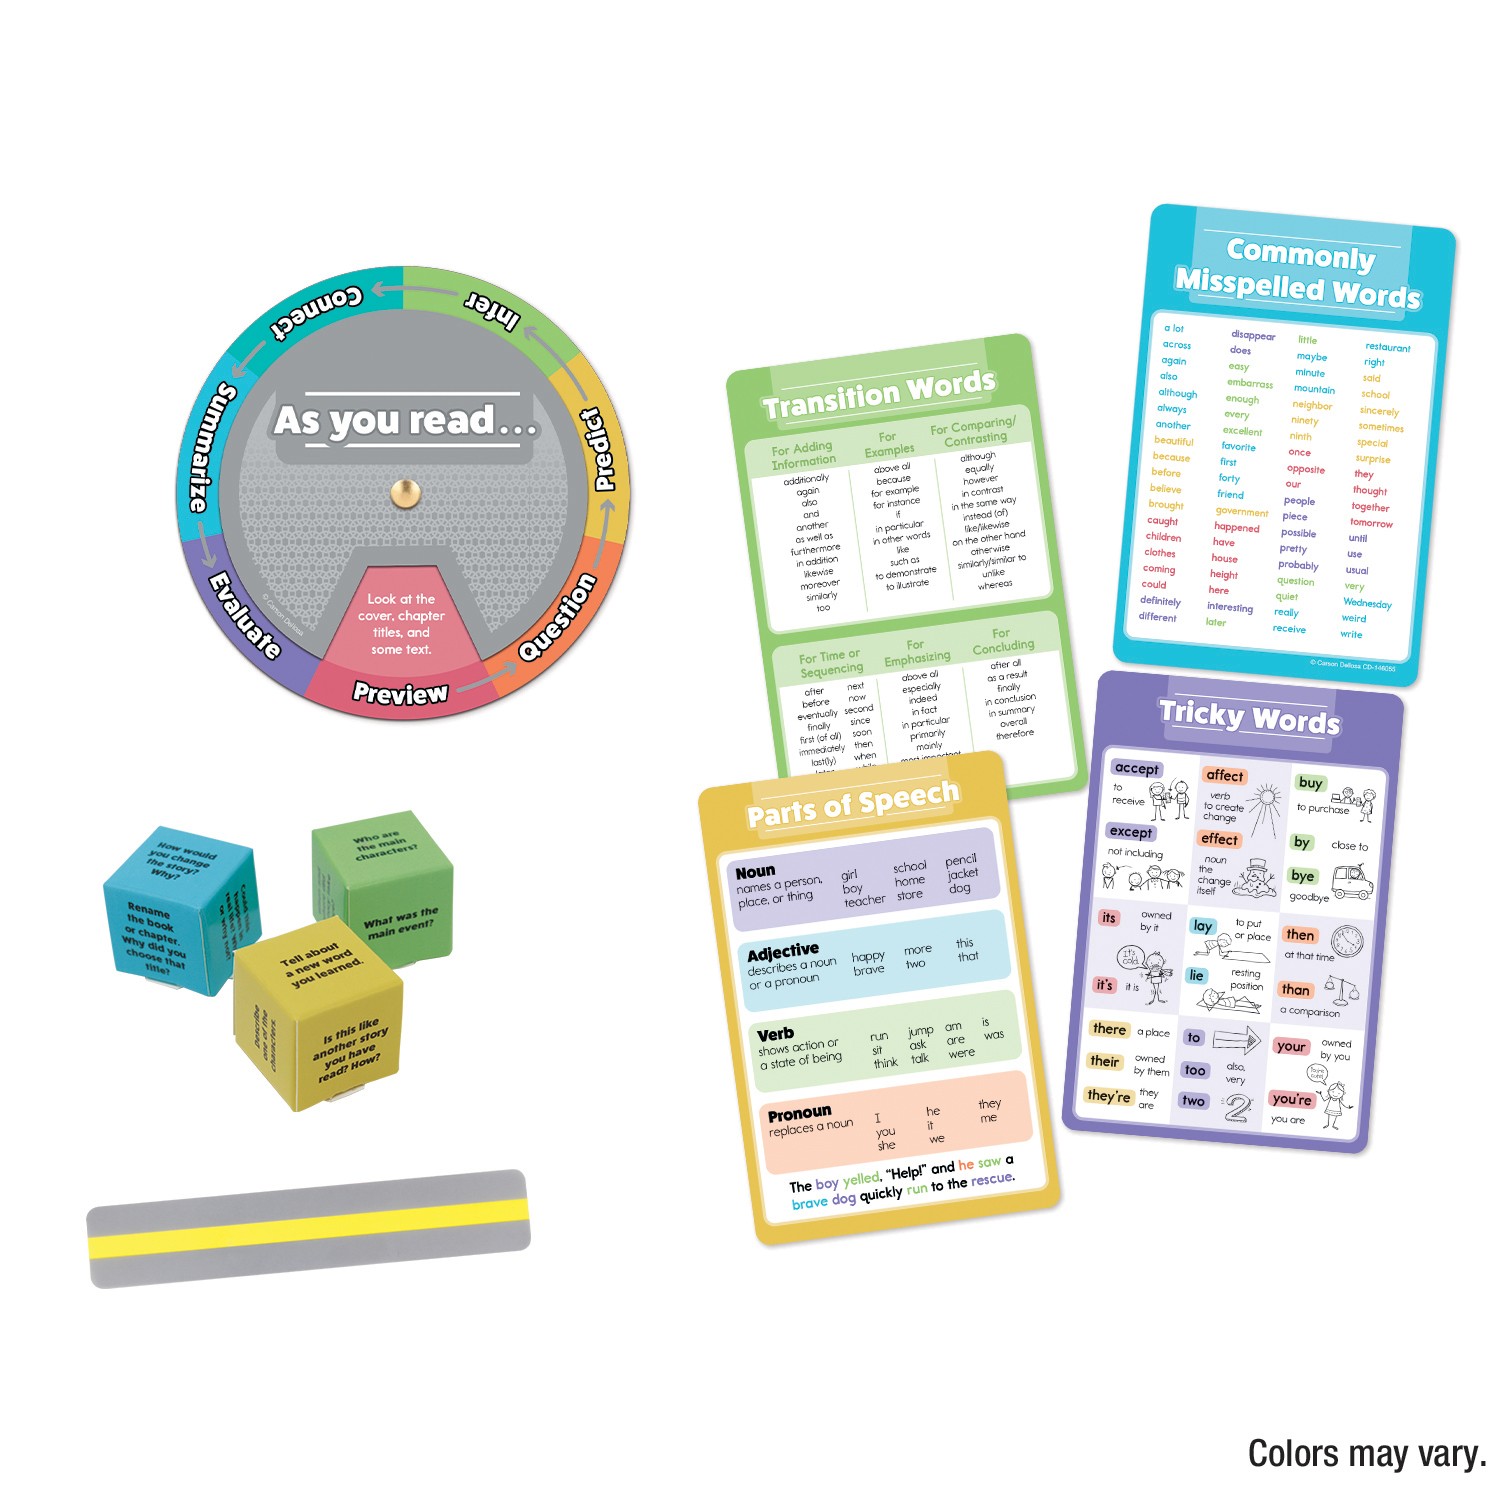 Be Clever Wherever Reading & Writing Tool Kit Manipulative, Grade 3-5